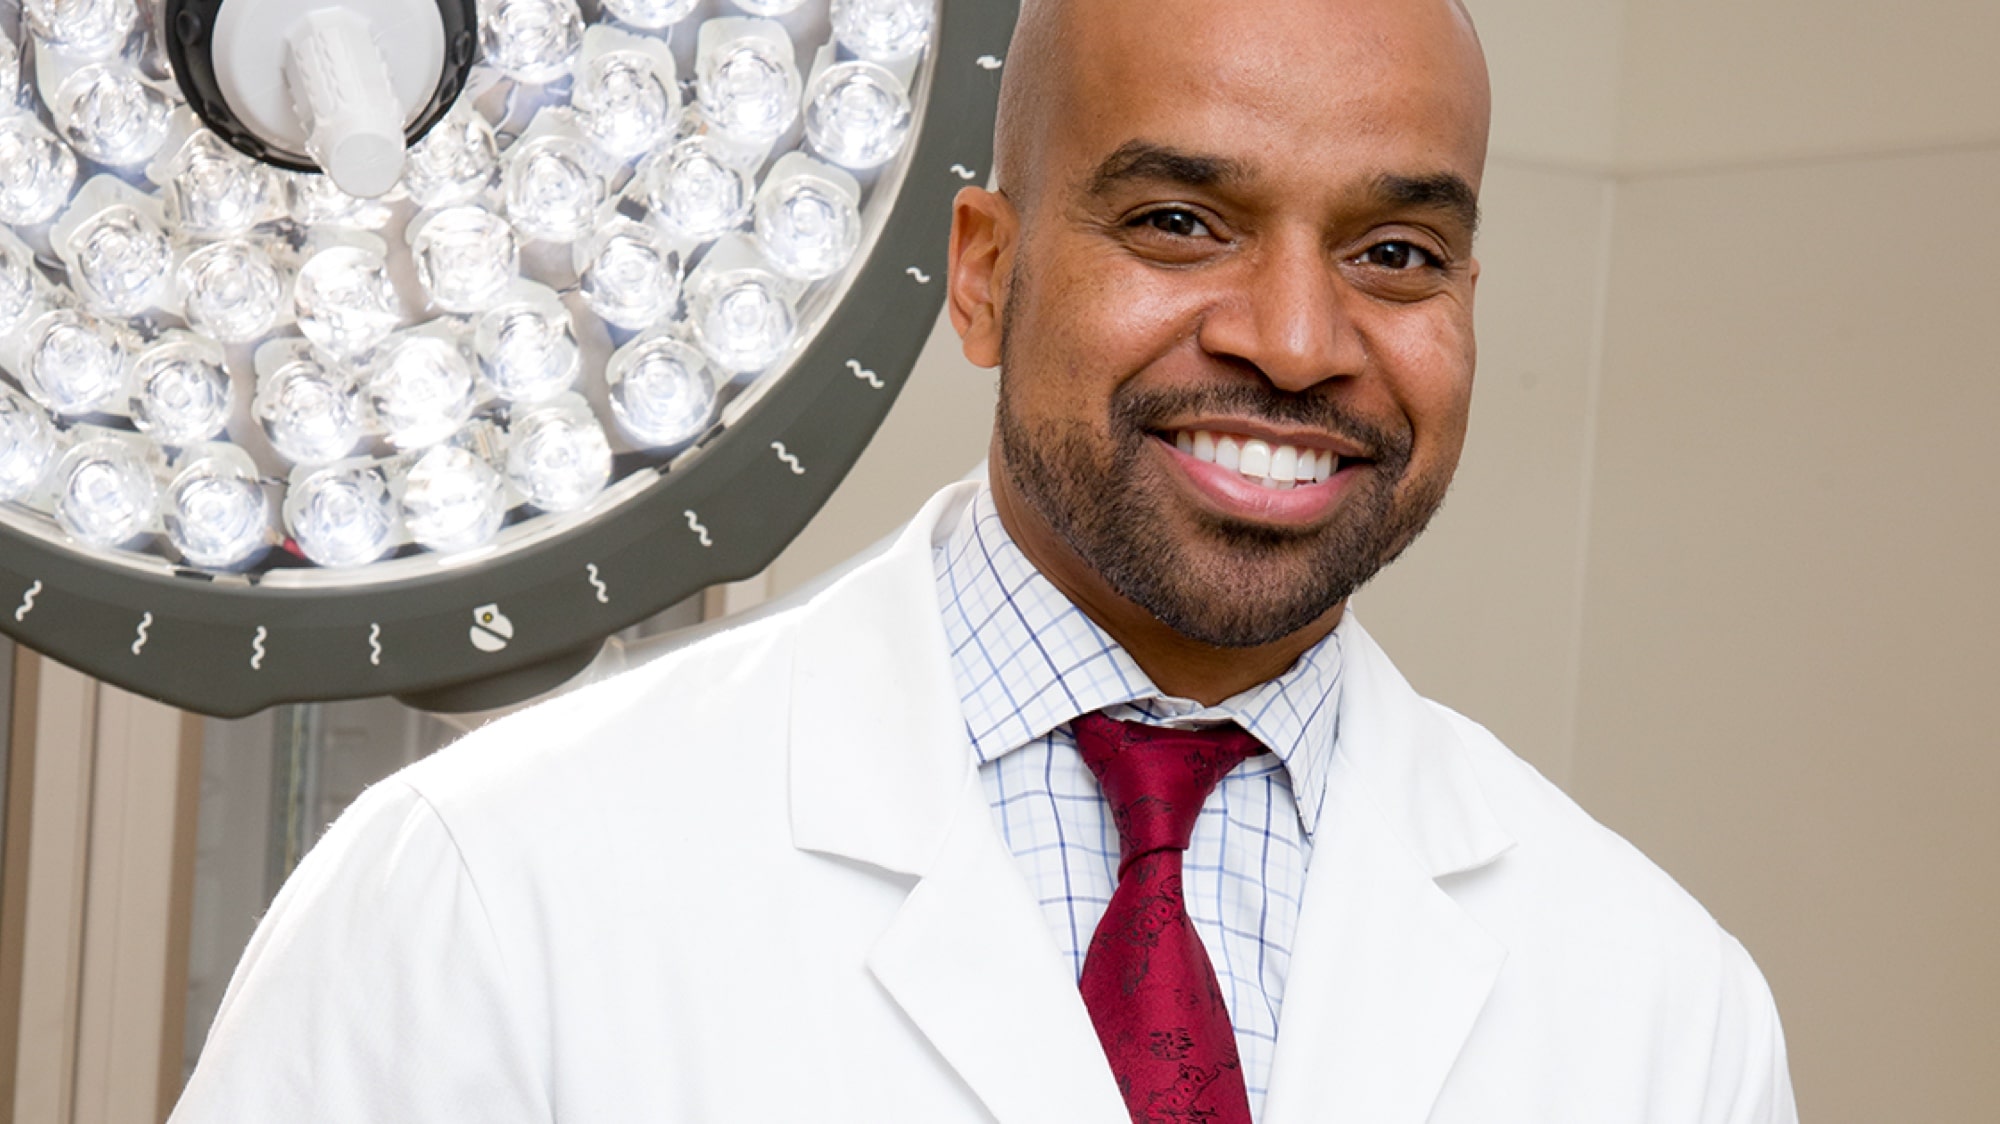 Smiling portrait of young black male doctor